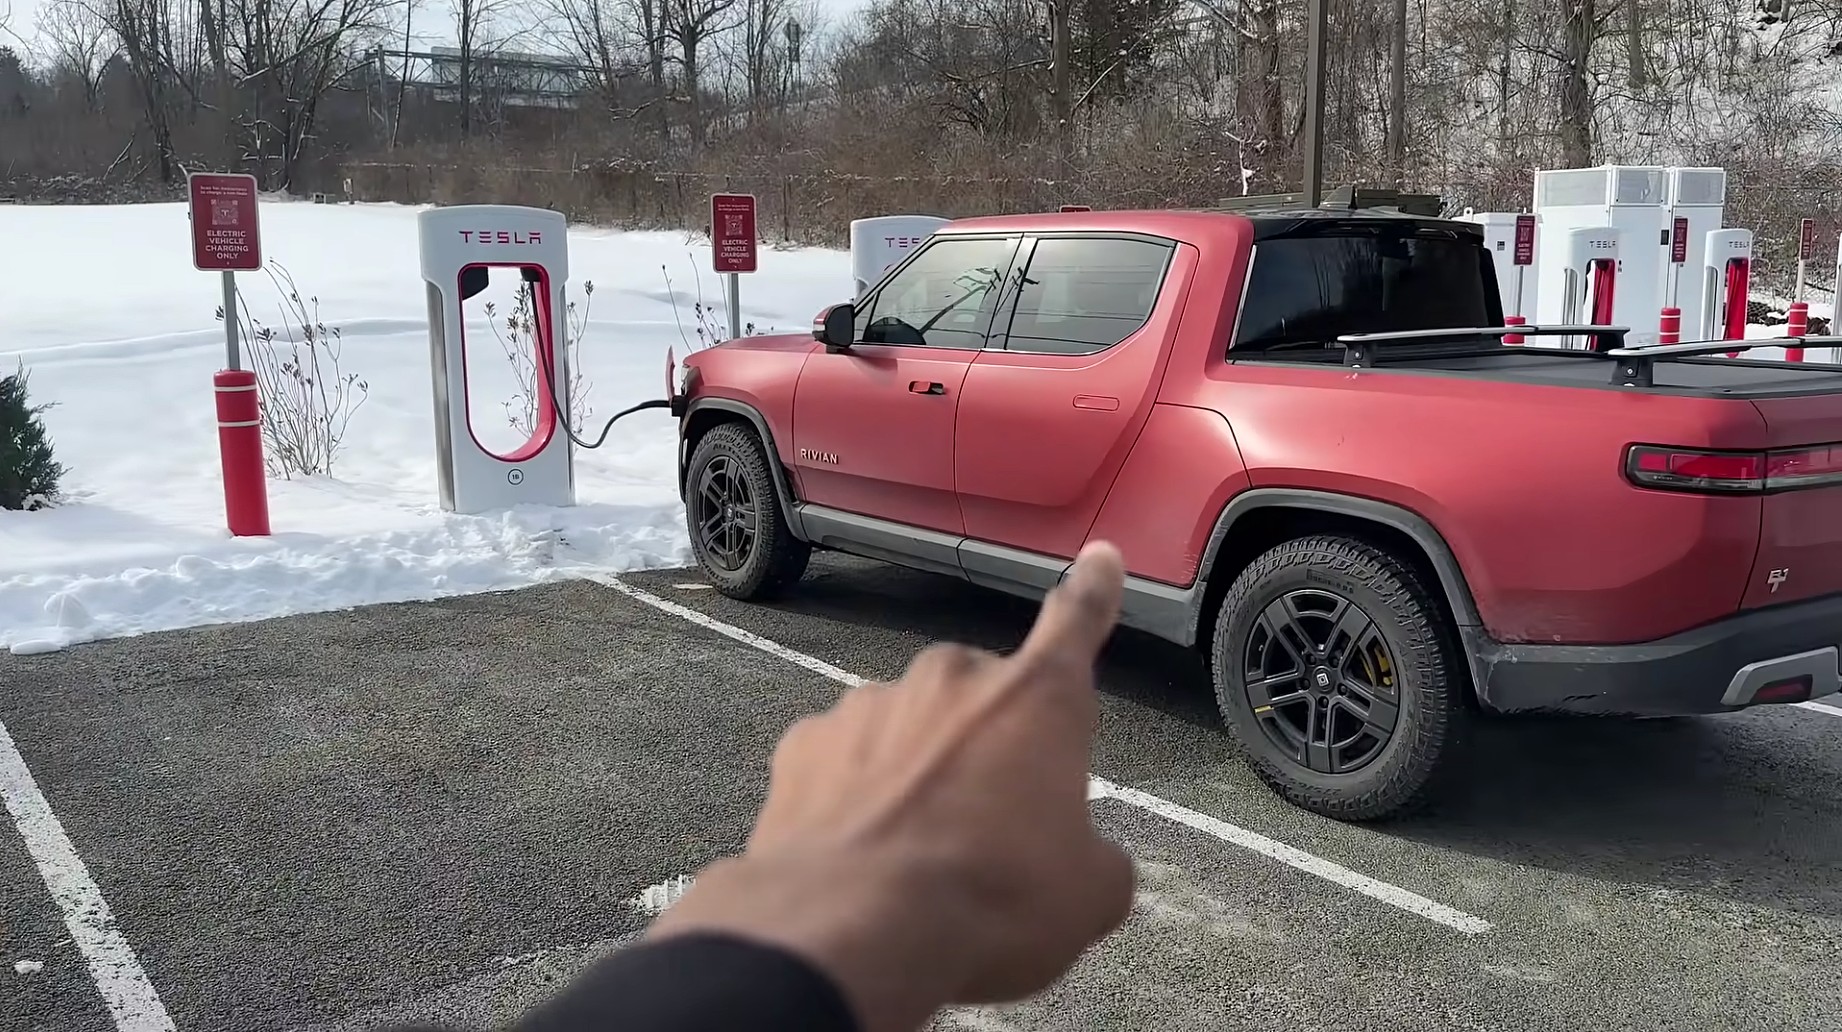 Rivian Welcomes Tesla Drivers: New Charging Stations Open to All Electric Cars Later This Year